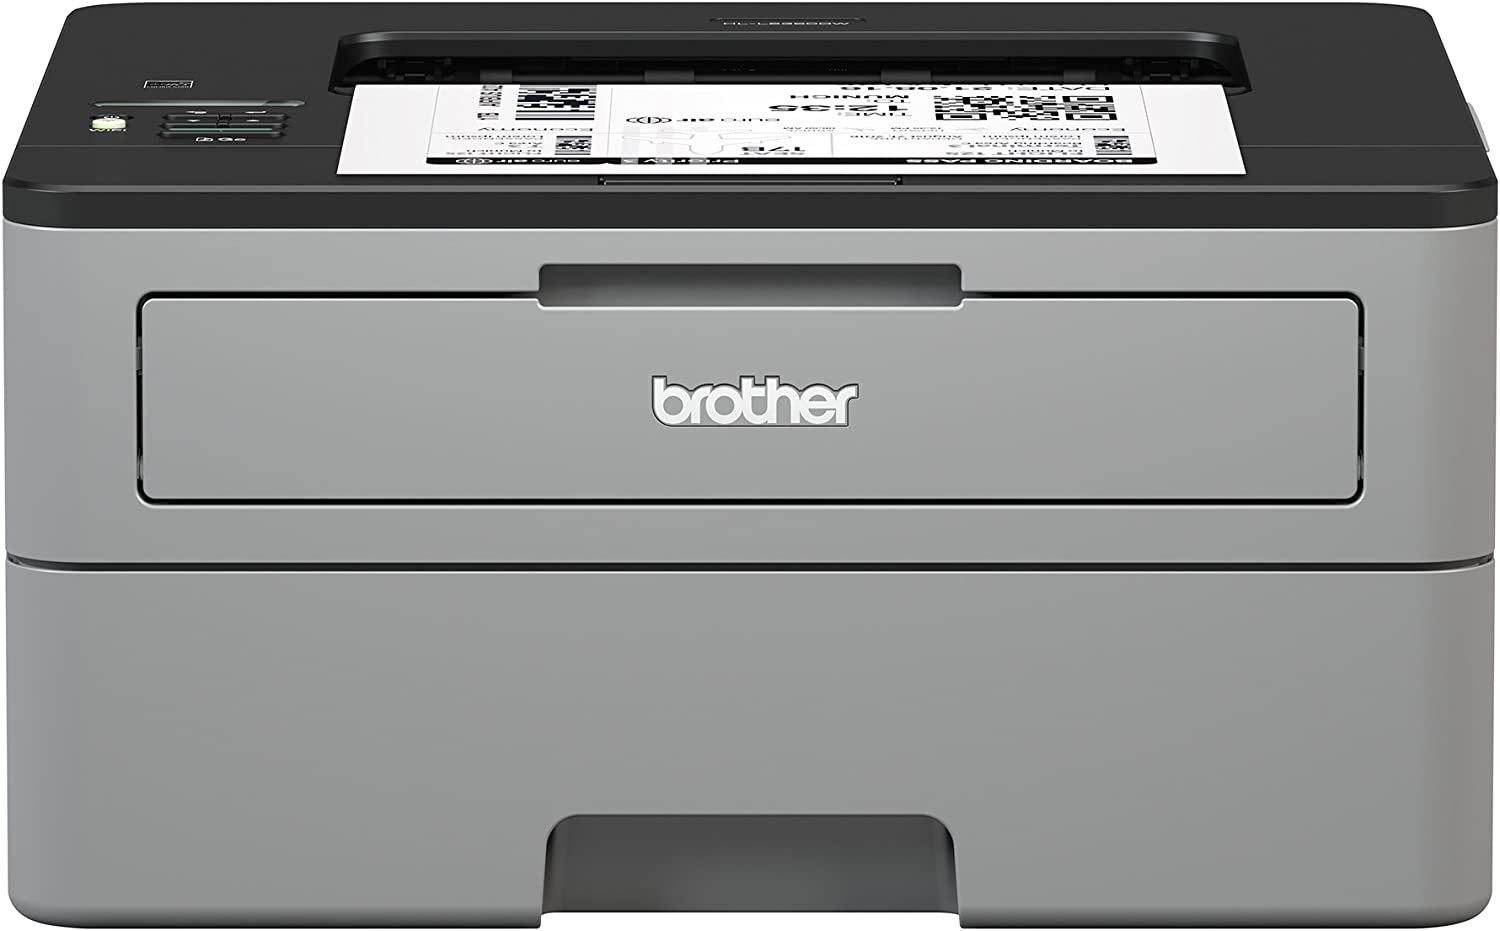 Primary image for Brother Compact Monochrome Laser Printer, Hl-L2350Dw, Wireless Printing, Duplex